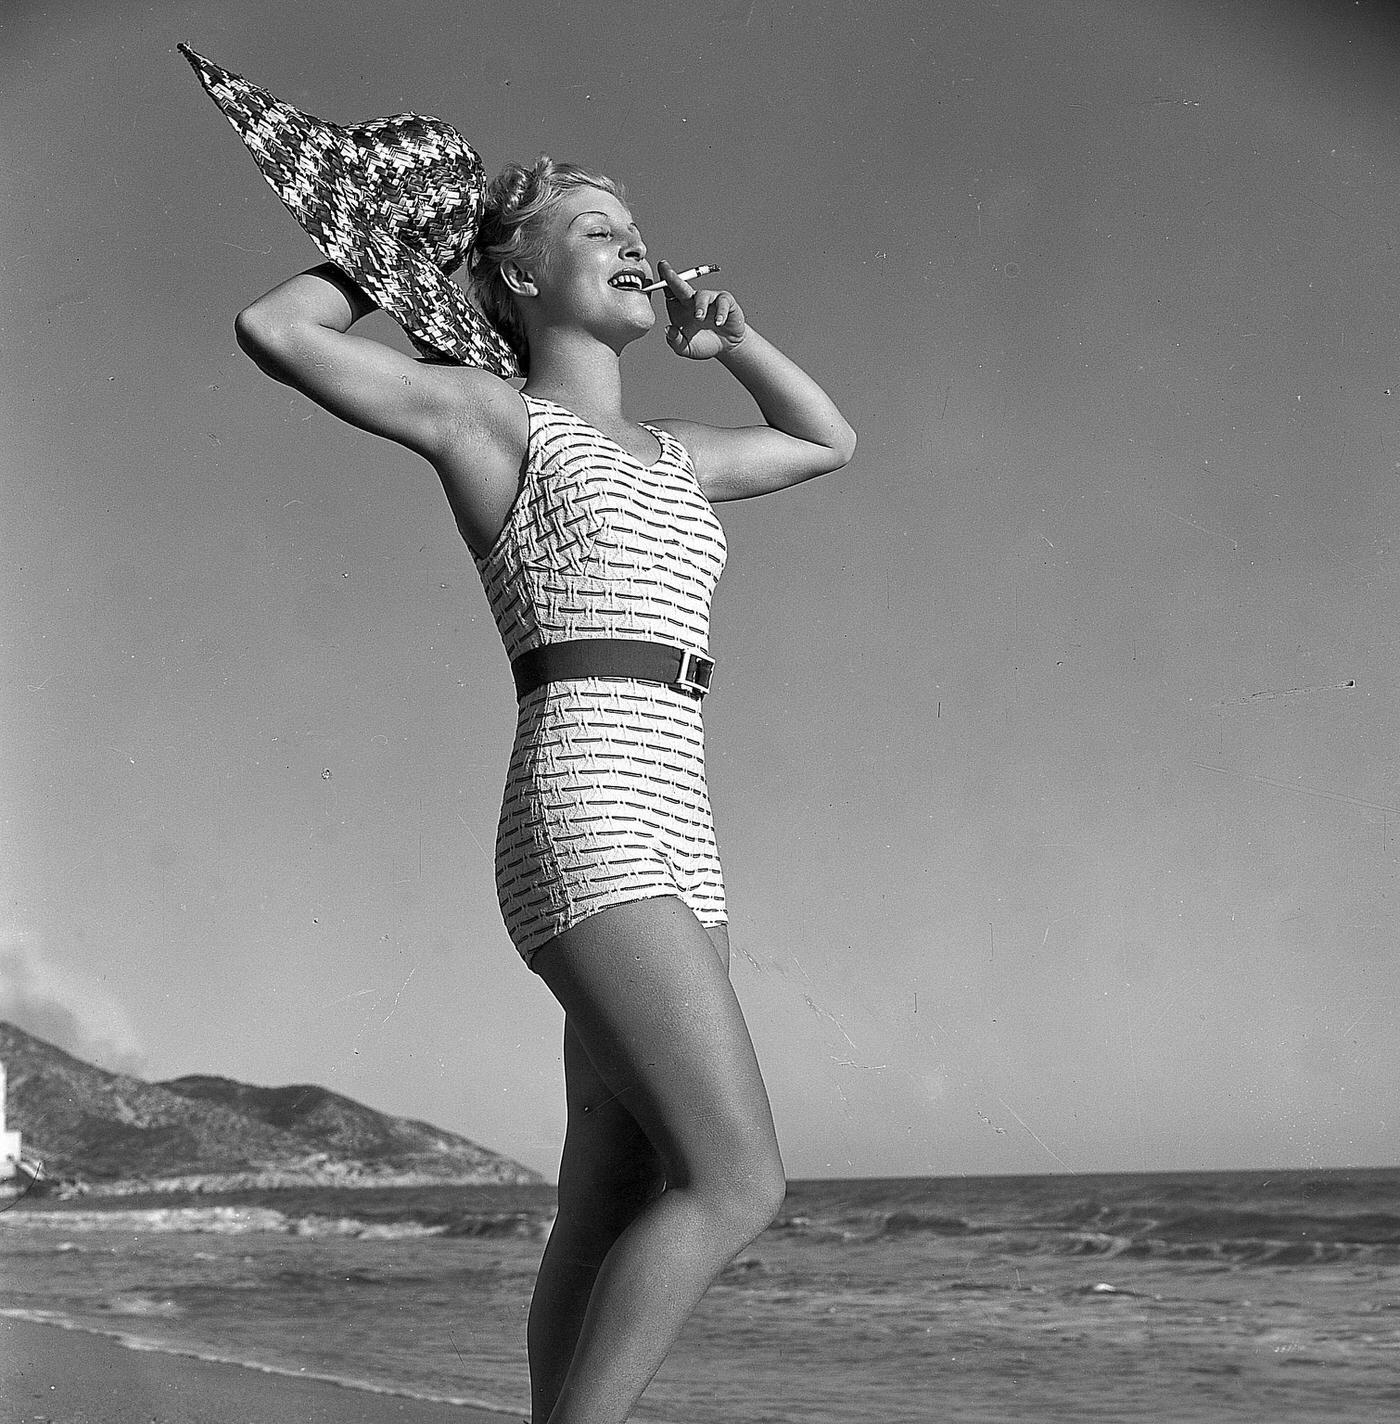 Blonde beauty in her bathing suit on the beach smoking a cigarette, 1930.